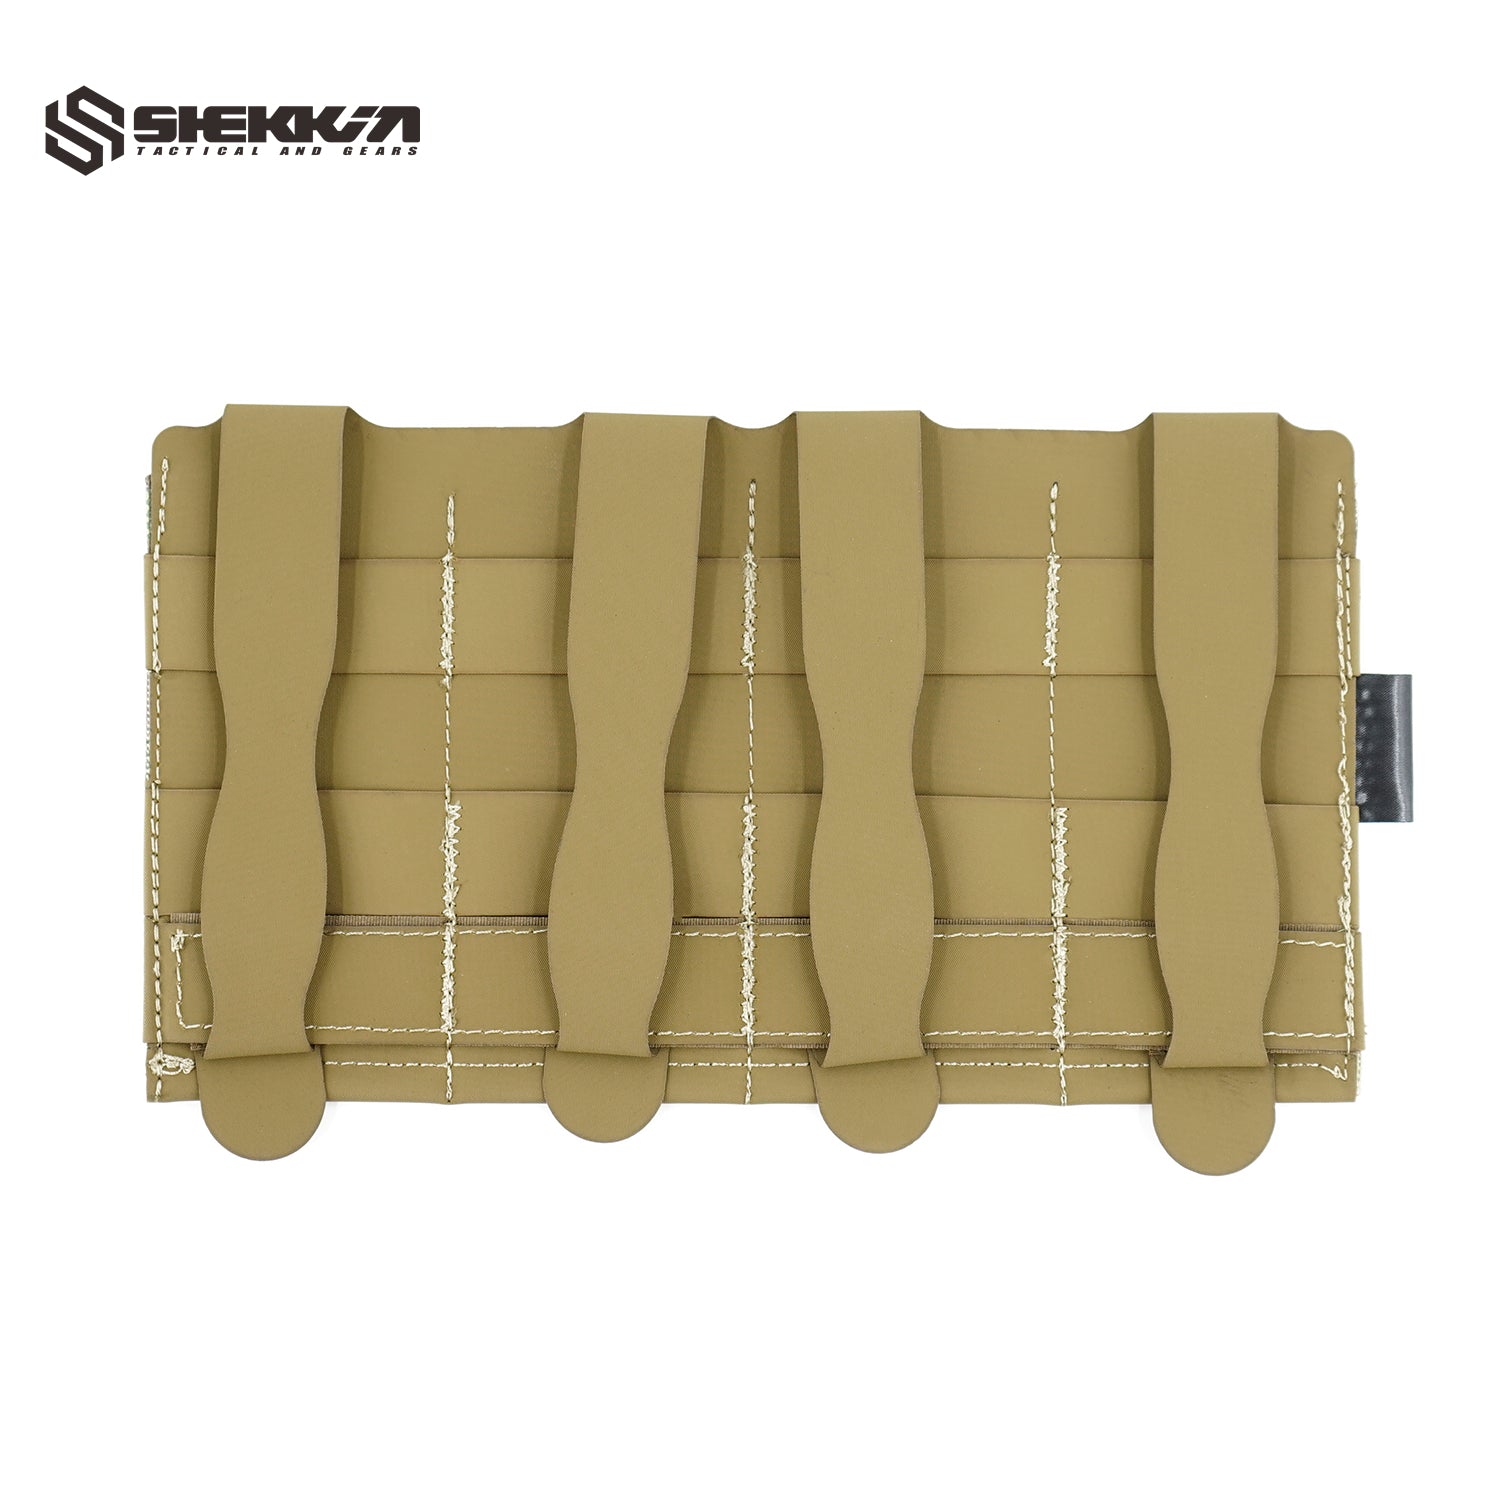 Elastic Quad mag SMG pouch - Shekkin Gears